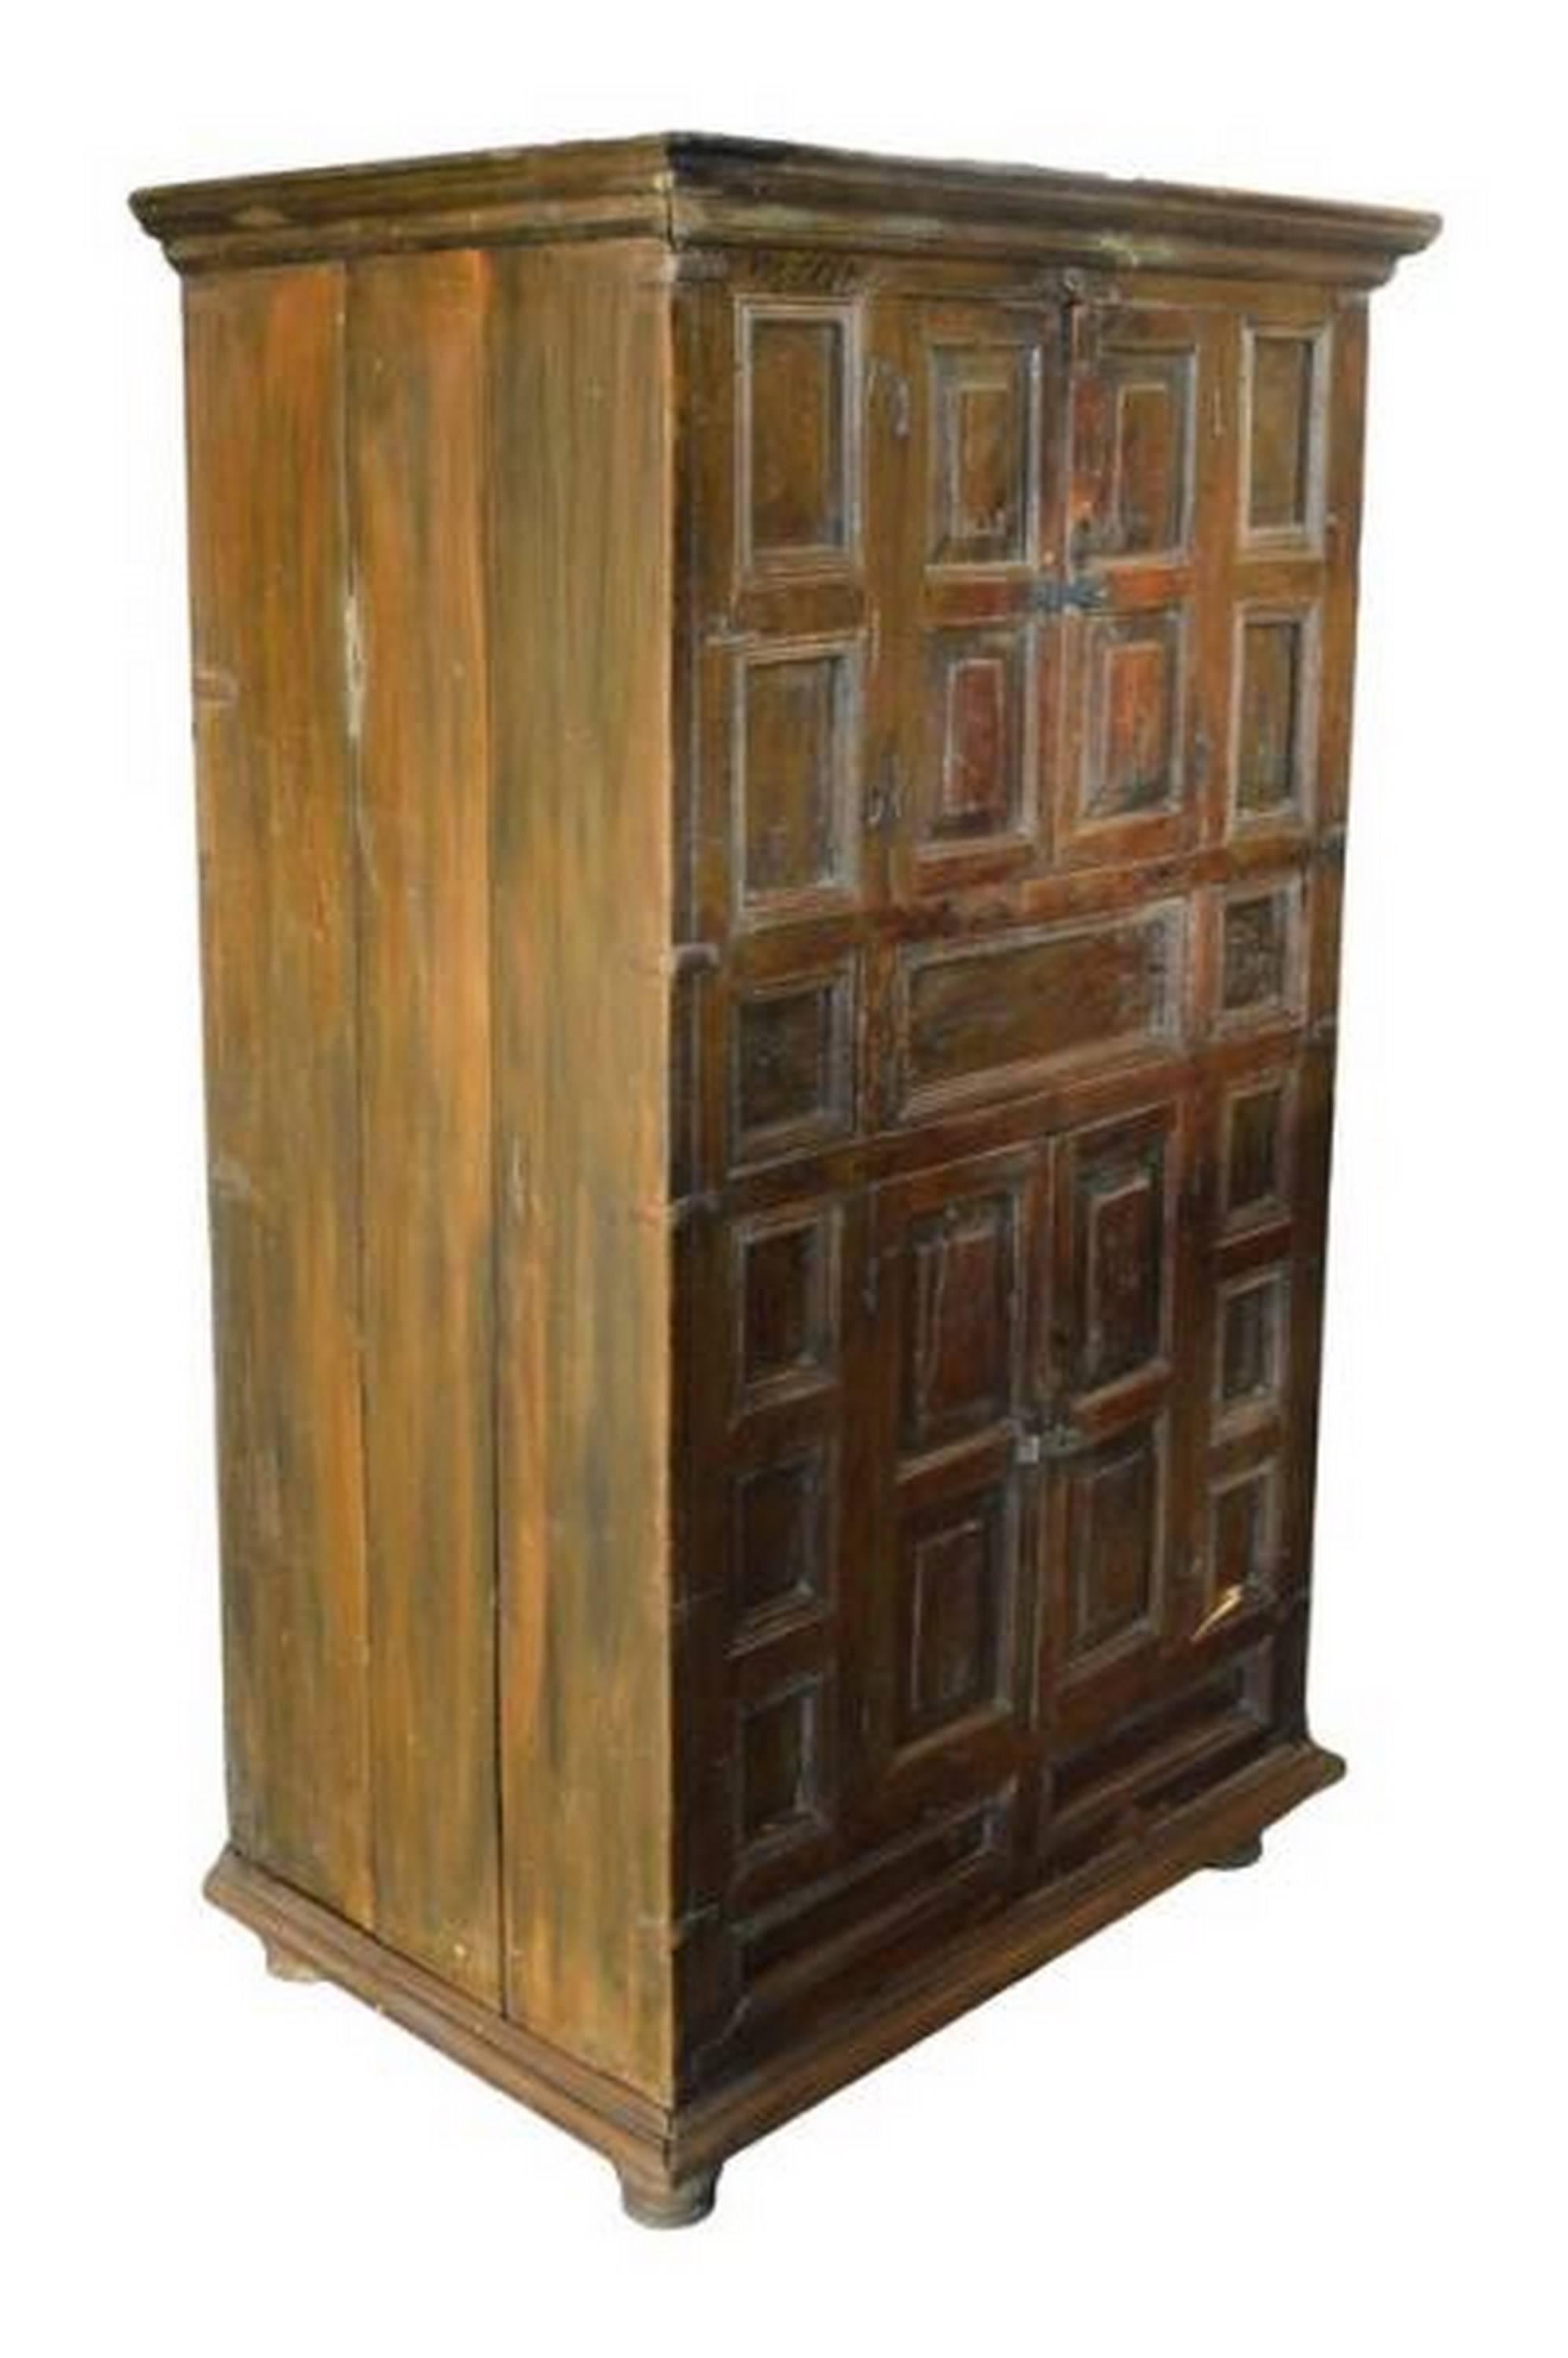 A mid-19th century rustic wooden cabinet with five hand carved doors made in India. This tall cabinet adopts an overall rectangular shape while its front façade is decorated with numerous rectangular details. The cabinet features one upper and one